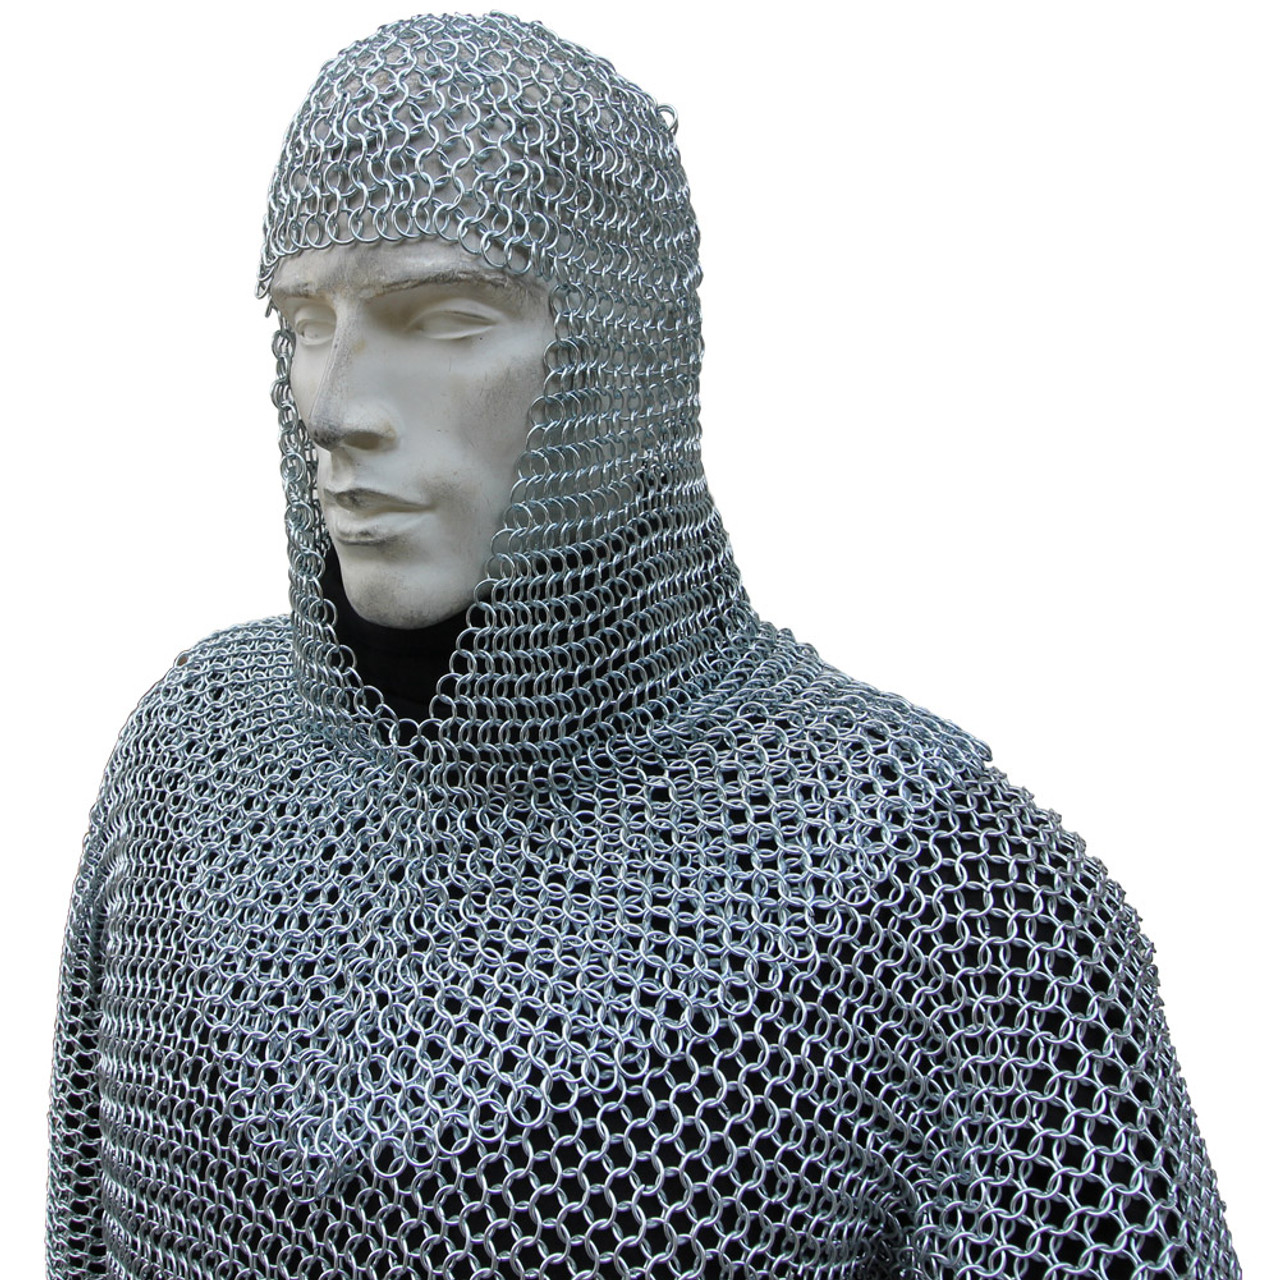 https://cdn11.bigcommerce.com/s-iut5ld55uy/images/stencil/1280x1280/products/34000/161602/battle-ready-children-s-medieval-habergeon-chainmail-armor_3__88869.1564504893.jpg?c=2